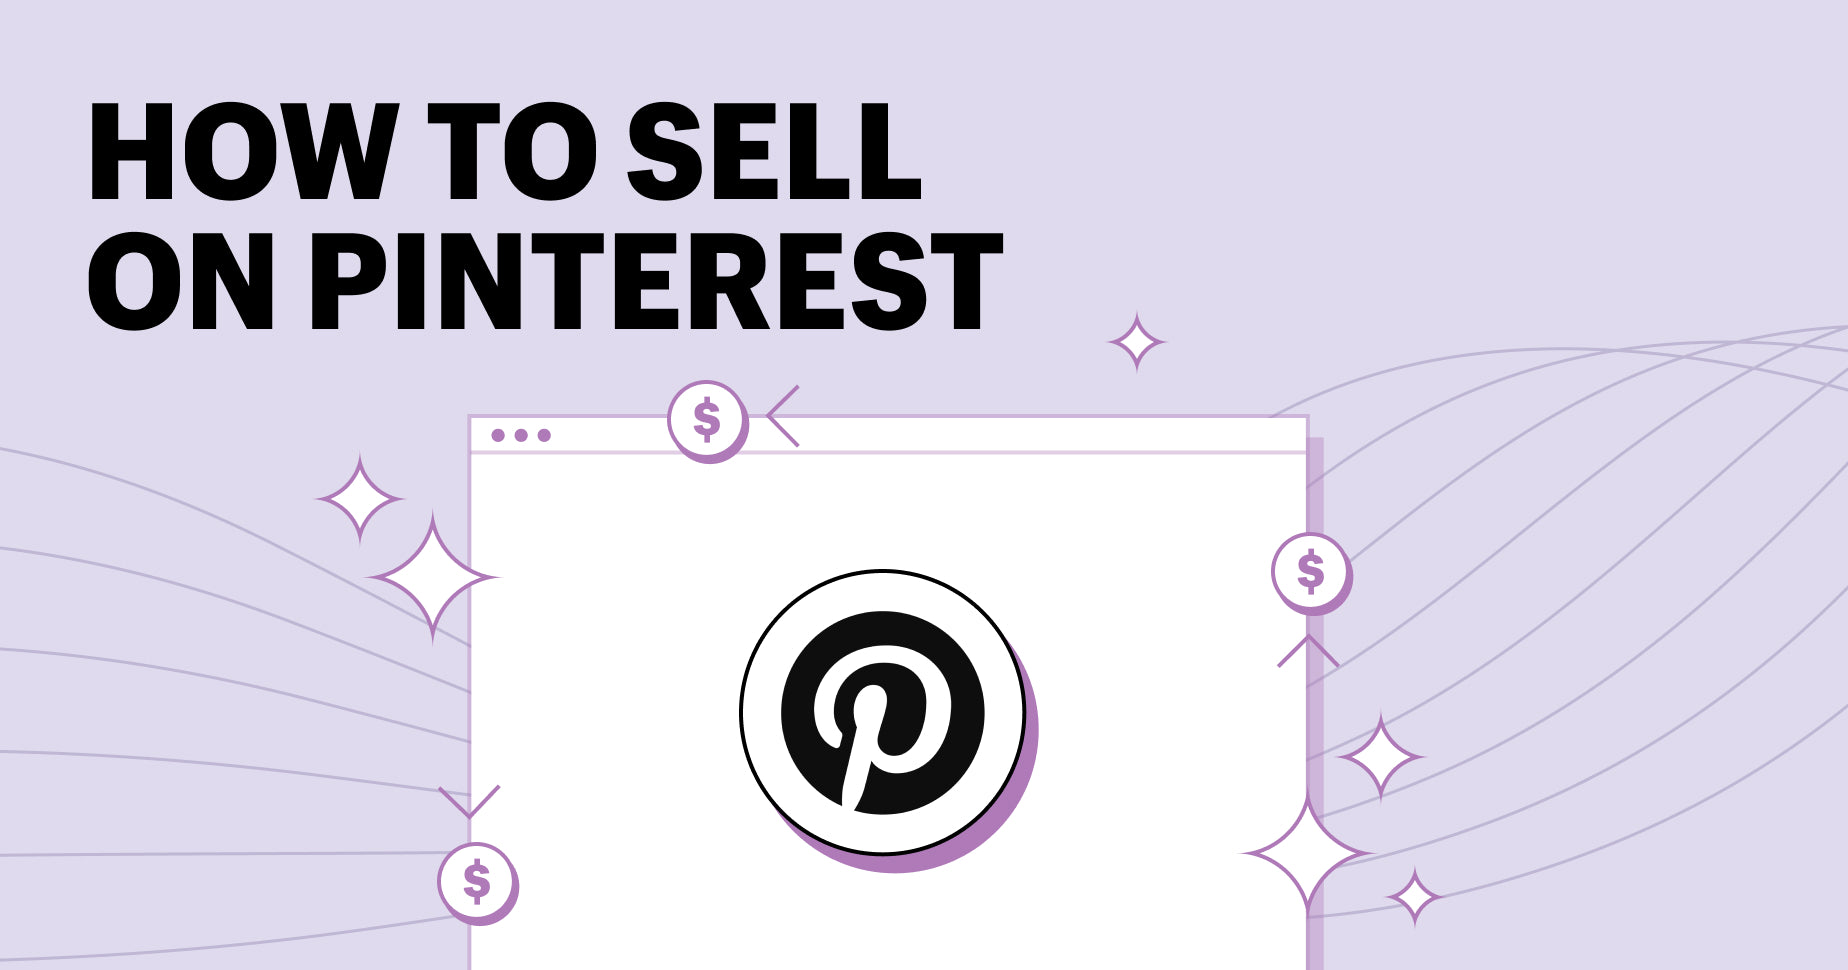 bijl zoete smaak dealer How To Sell on Pinterest | Updated for 2022